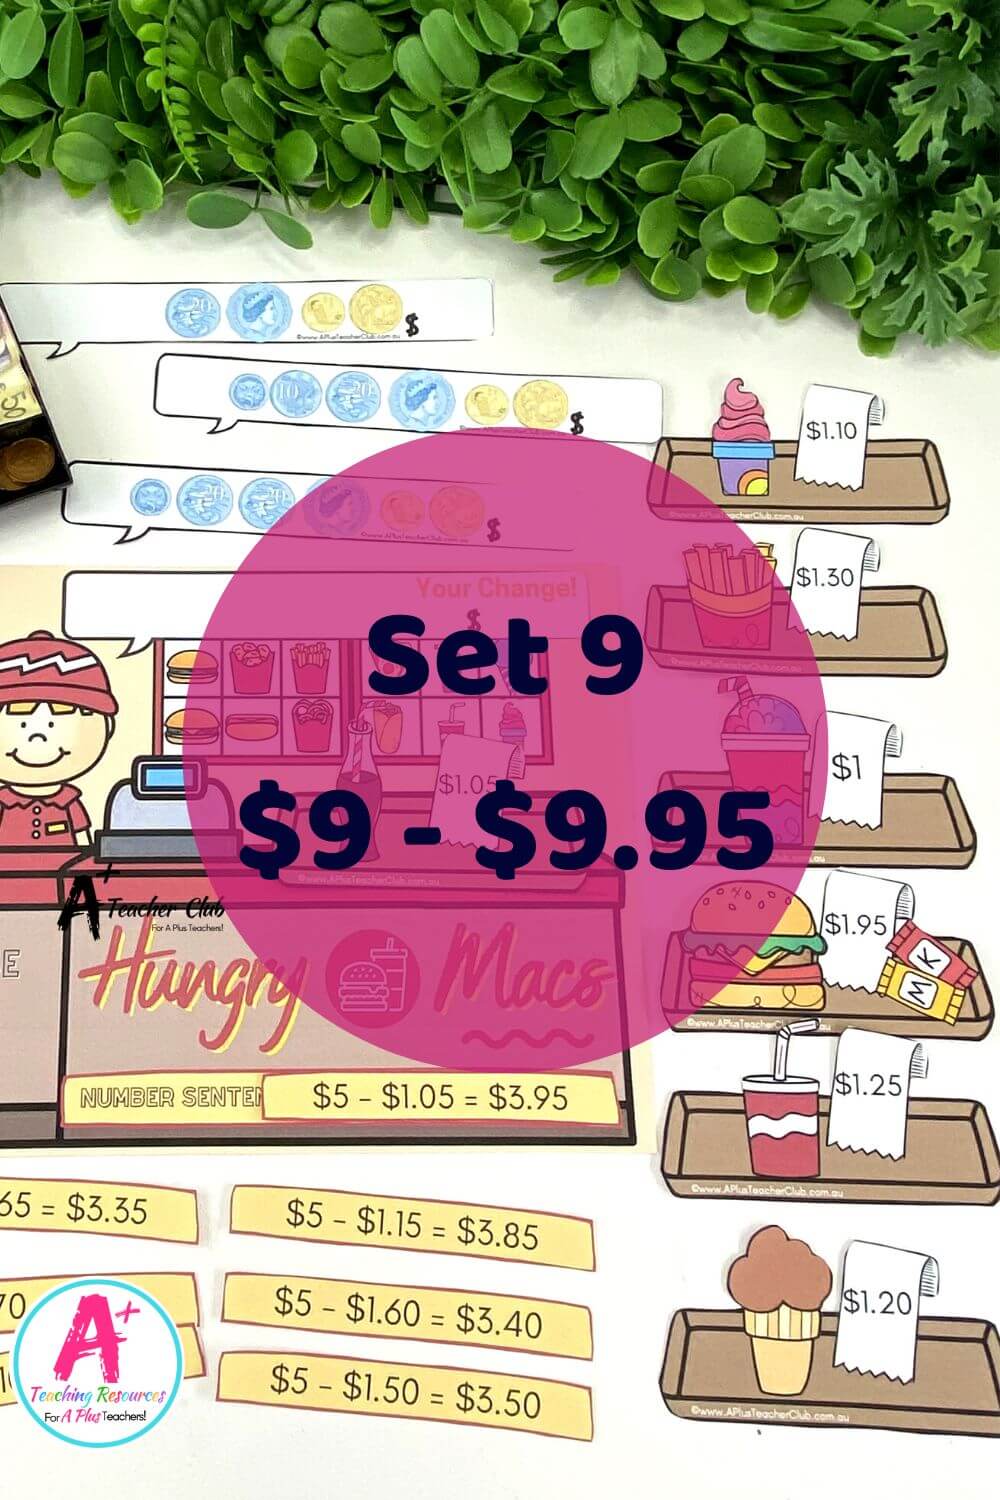 Counting Change Games - Fast Food Set 9 ($9-$9.95)